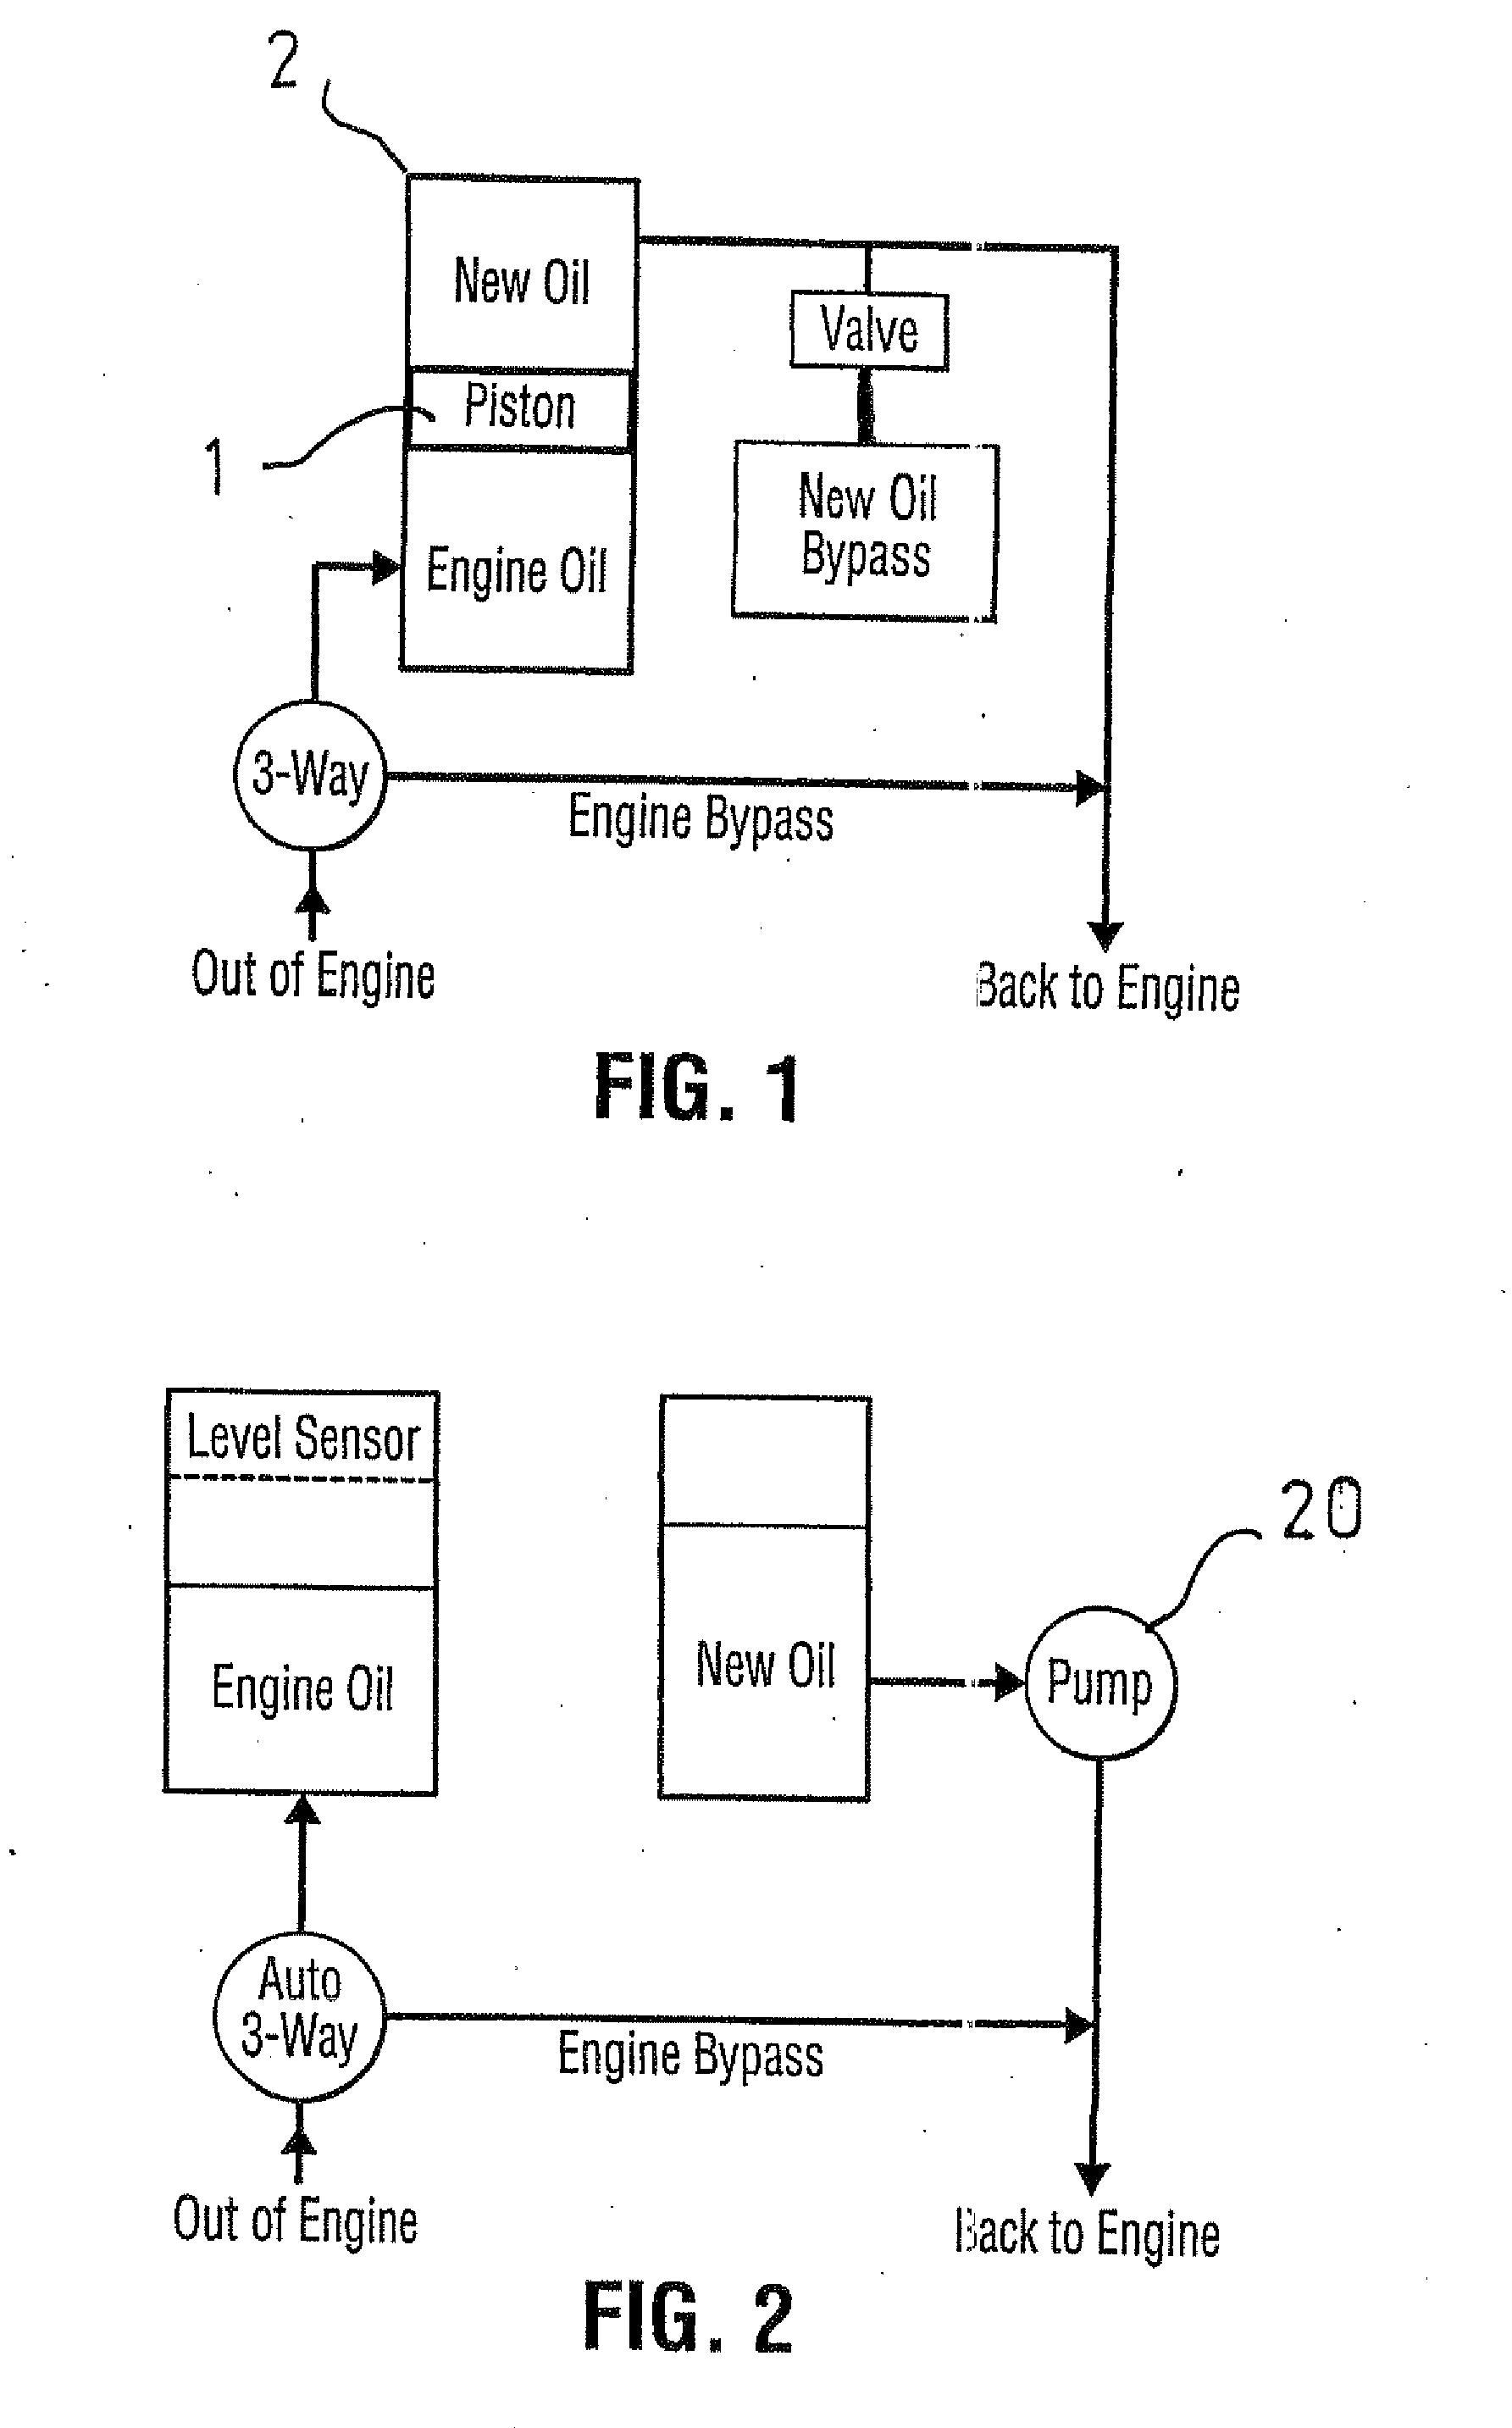 Quick oil change apparatus and process